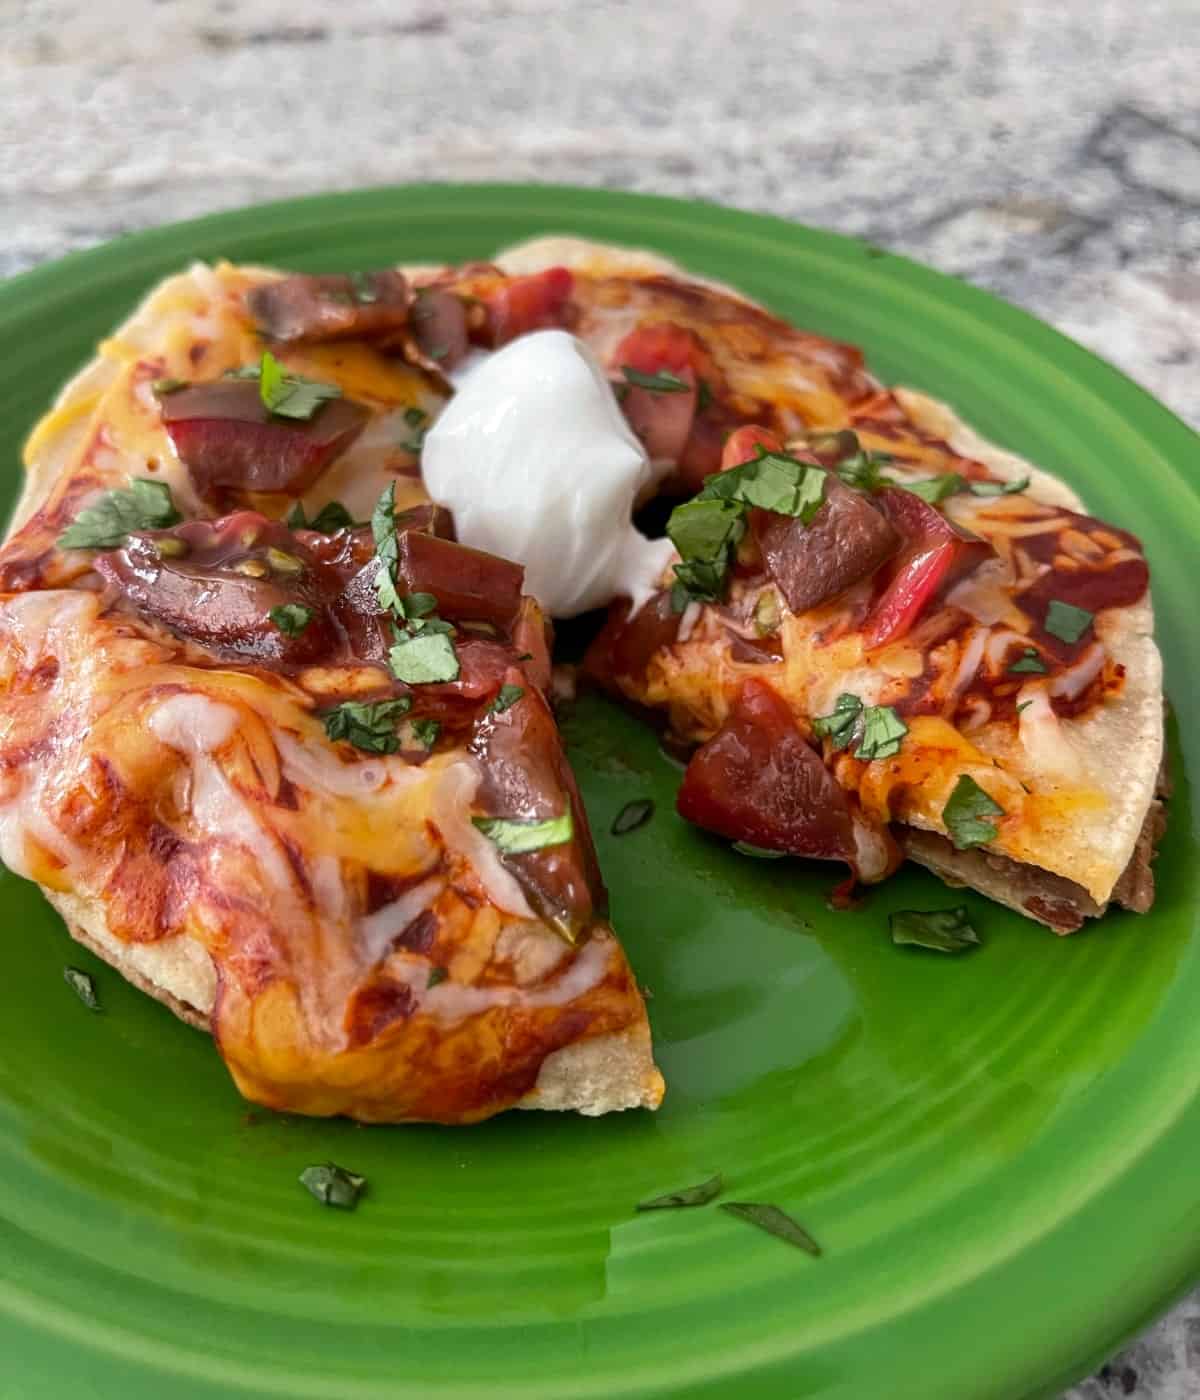 Skillet Mexican pizza garnished with chopped cilantro and sour cream on small green plate.